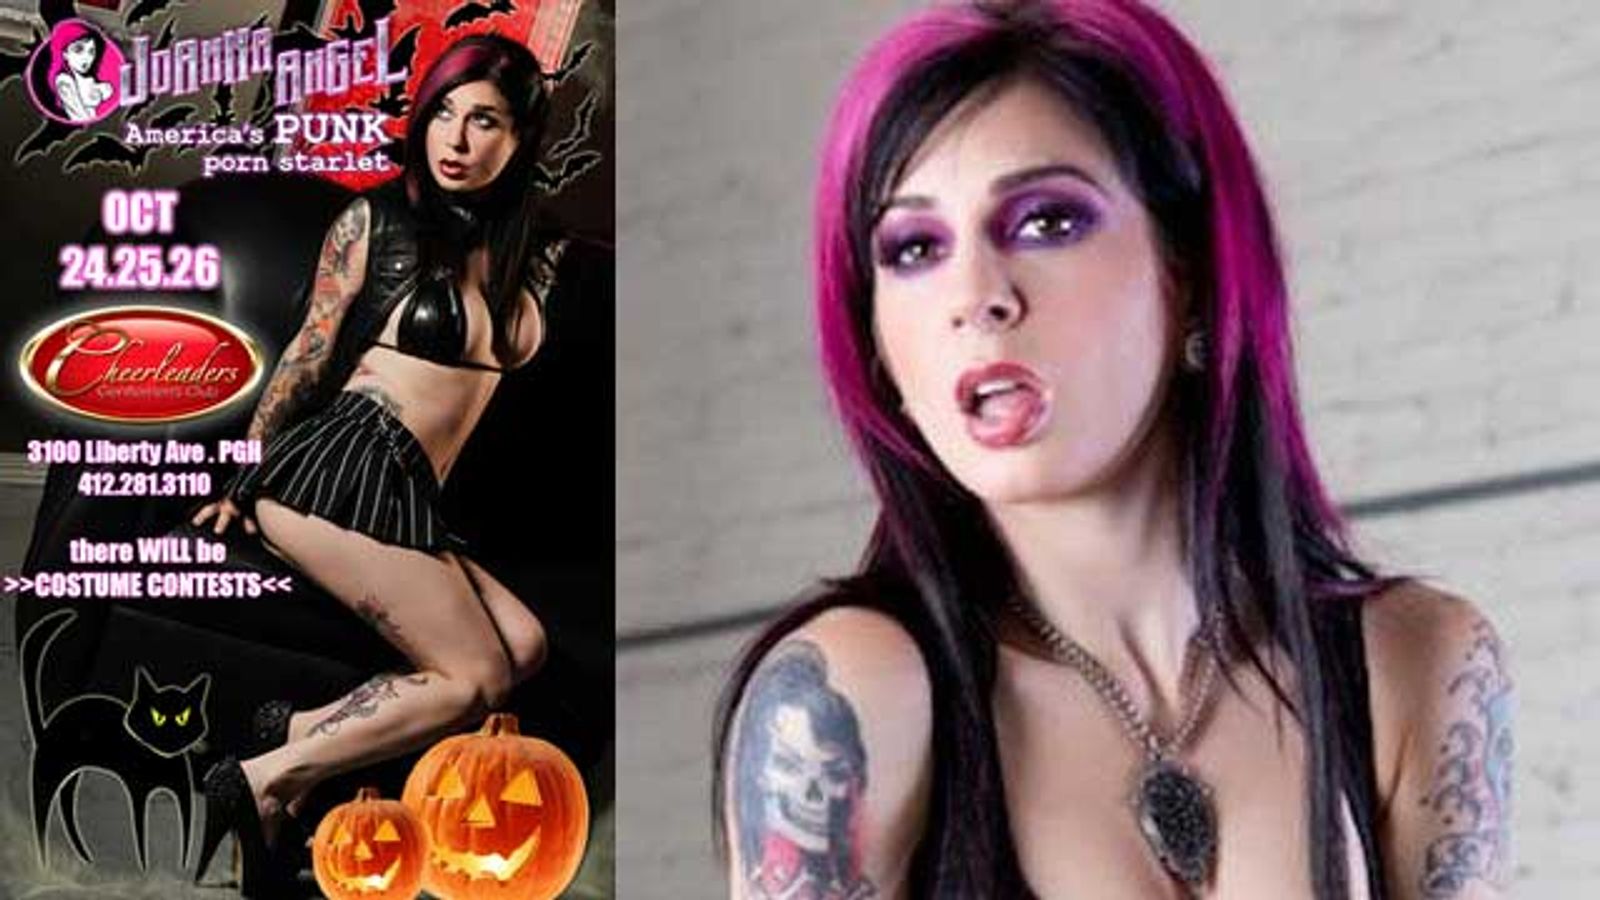 Joanna Angel Rocks Out in Pittsburgh October 24-26